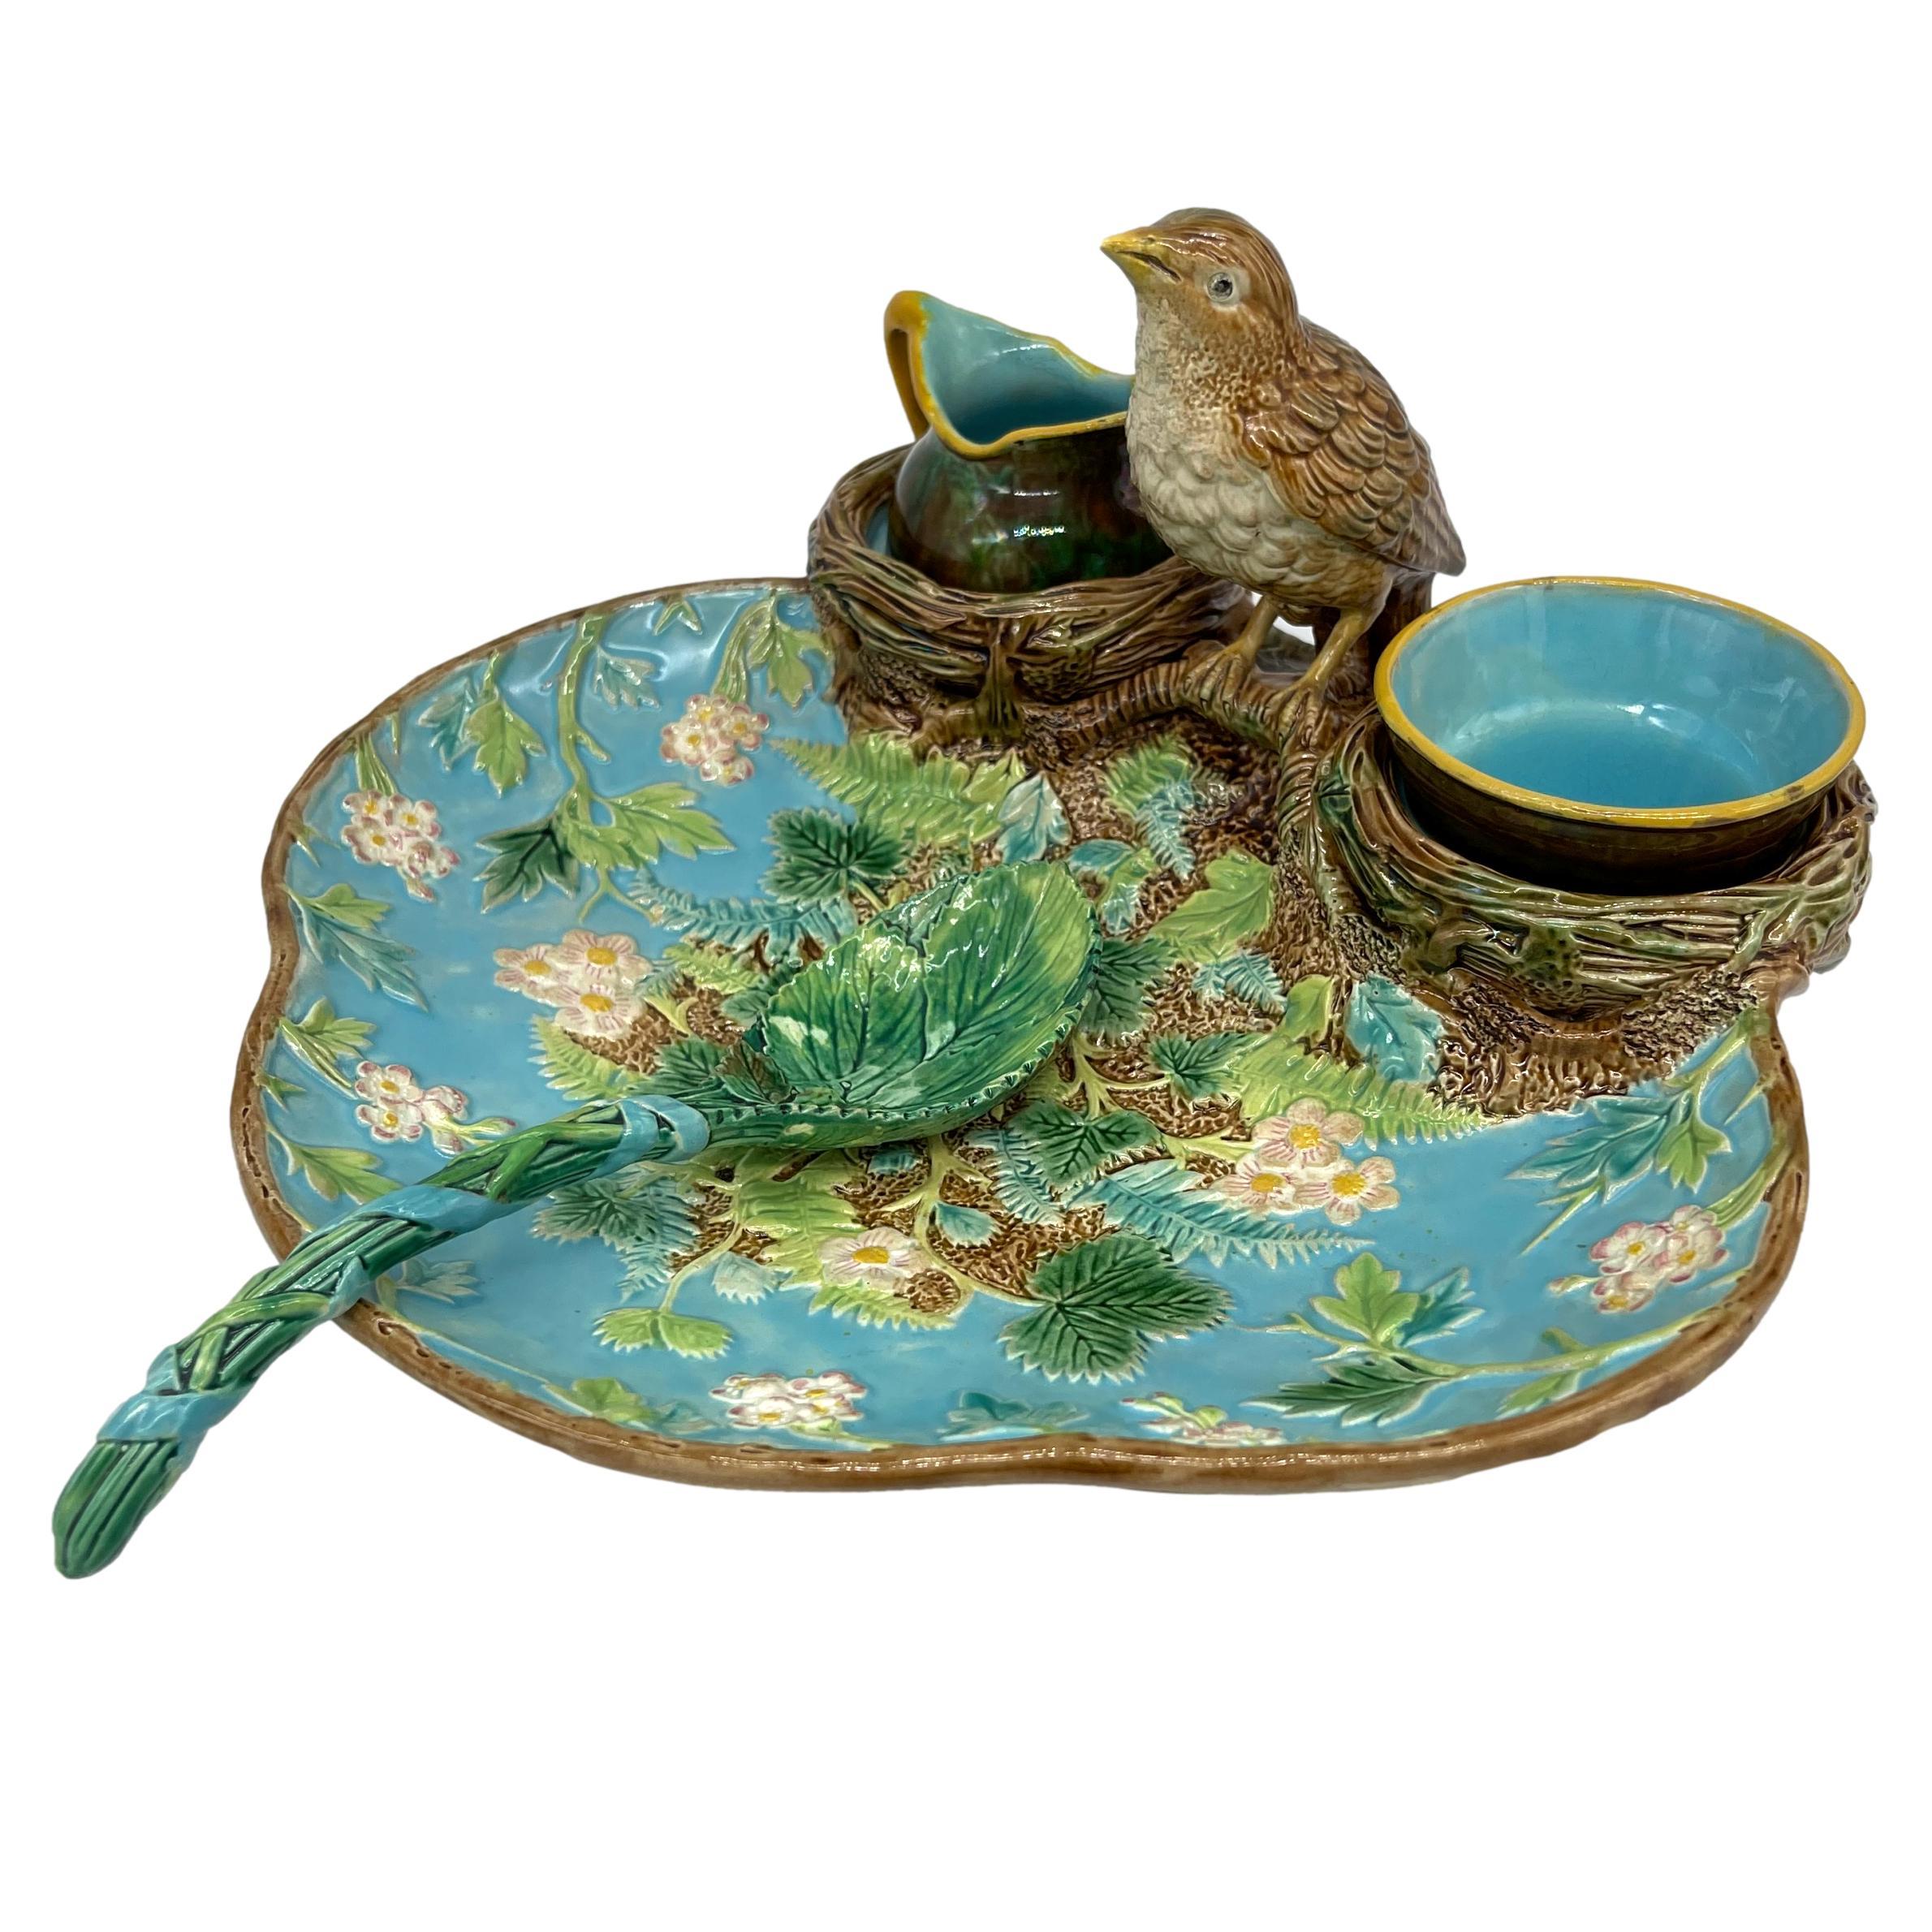 George Jones Majolica strawberry server, ca. 1870, the trefoil dish naturalistically modelled with blossoming strawberry plants and ferns on a turquoise and rustic ground, surmounted with a life-size Thrush perched on simulated branches between two